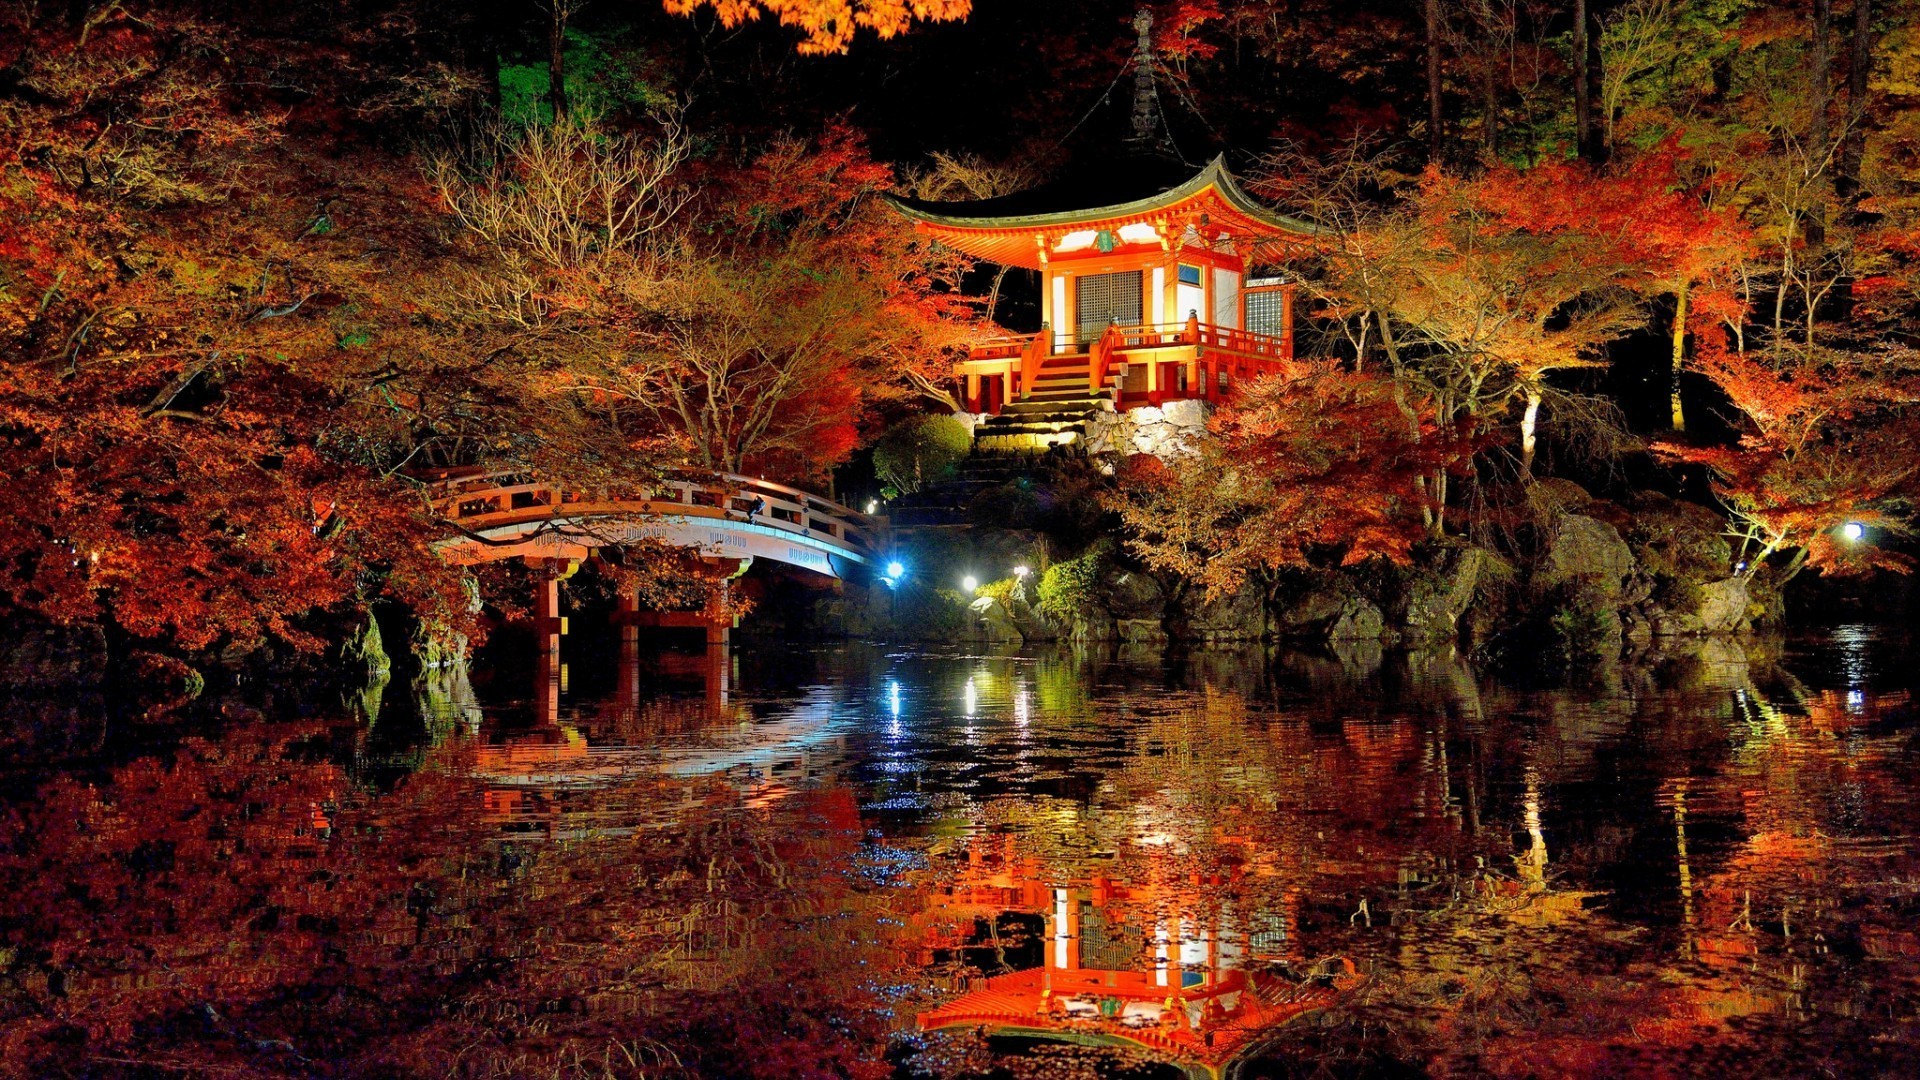 Nature, Trees, Forest, Leaves, Fall, Branch, Japan, Bridge, Night, Asian Architecture, Lights, Lake, Water, Rock, Reflection, Stairs Wallpapers HD / Desktop